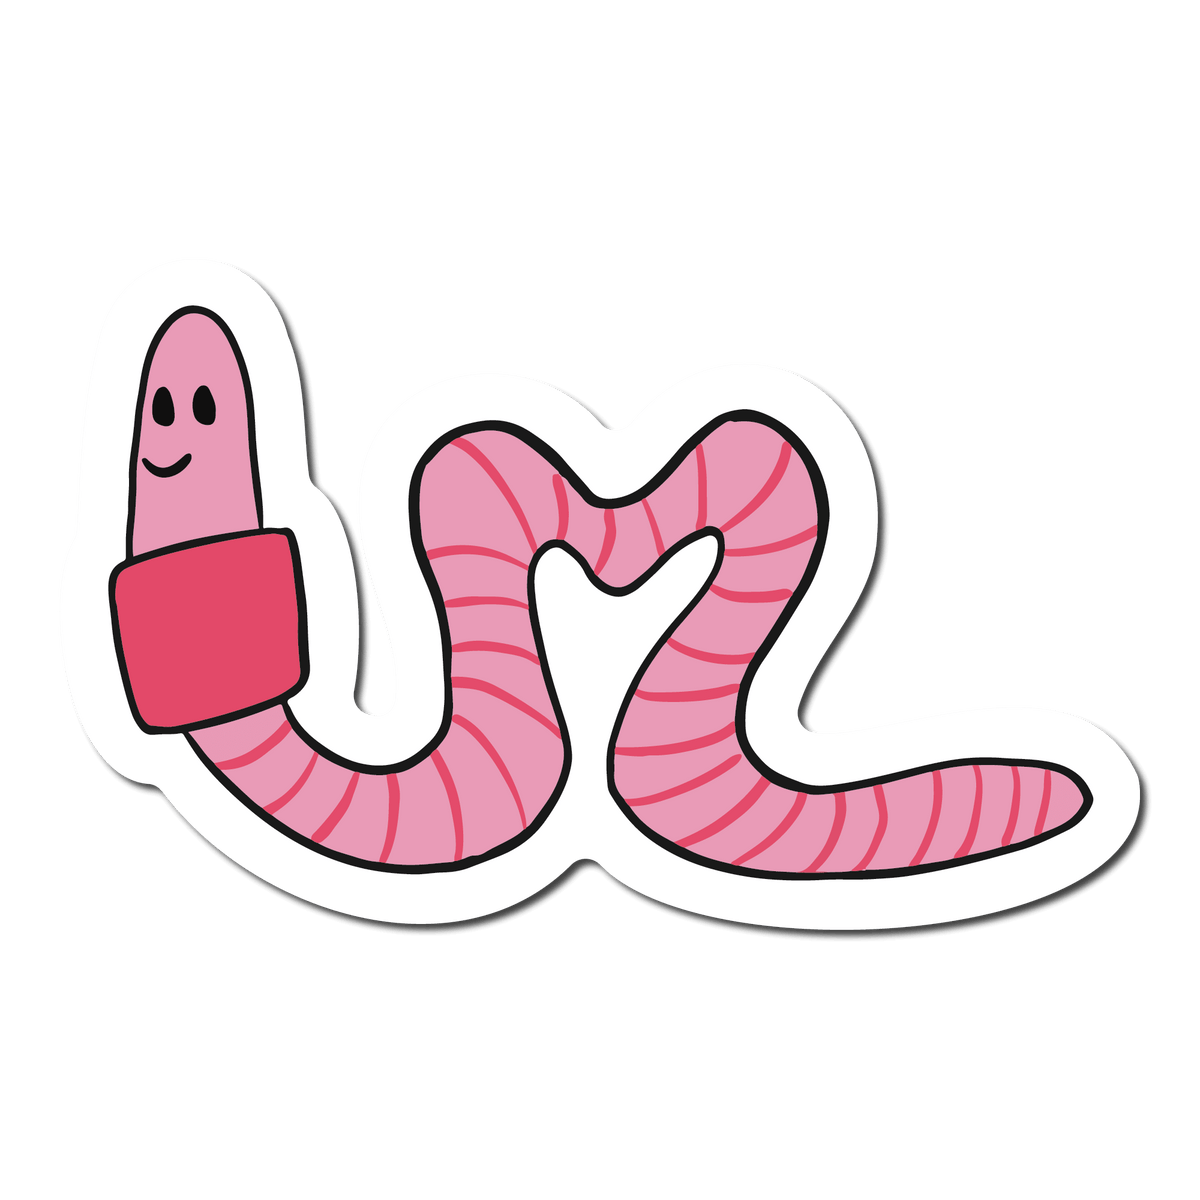 Small Sticker of a Pink Worm that has a heart